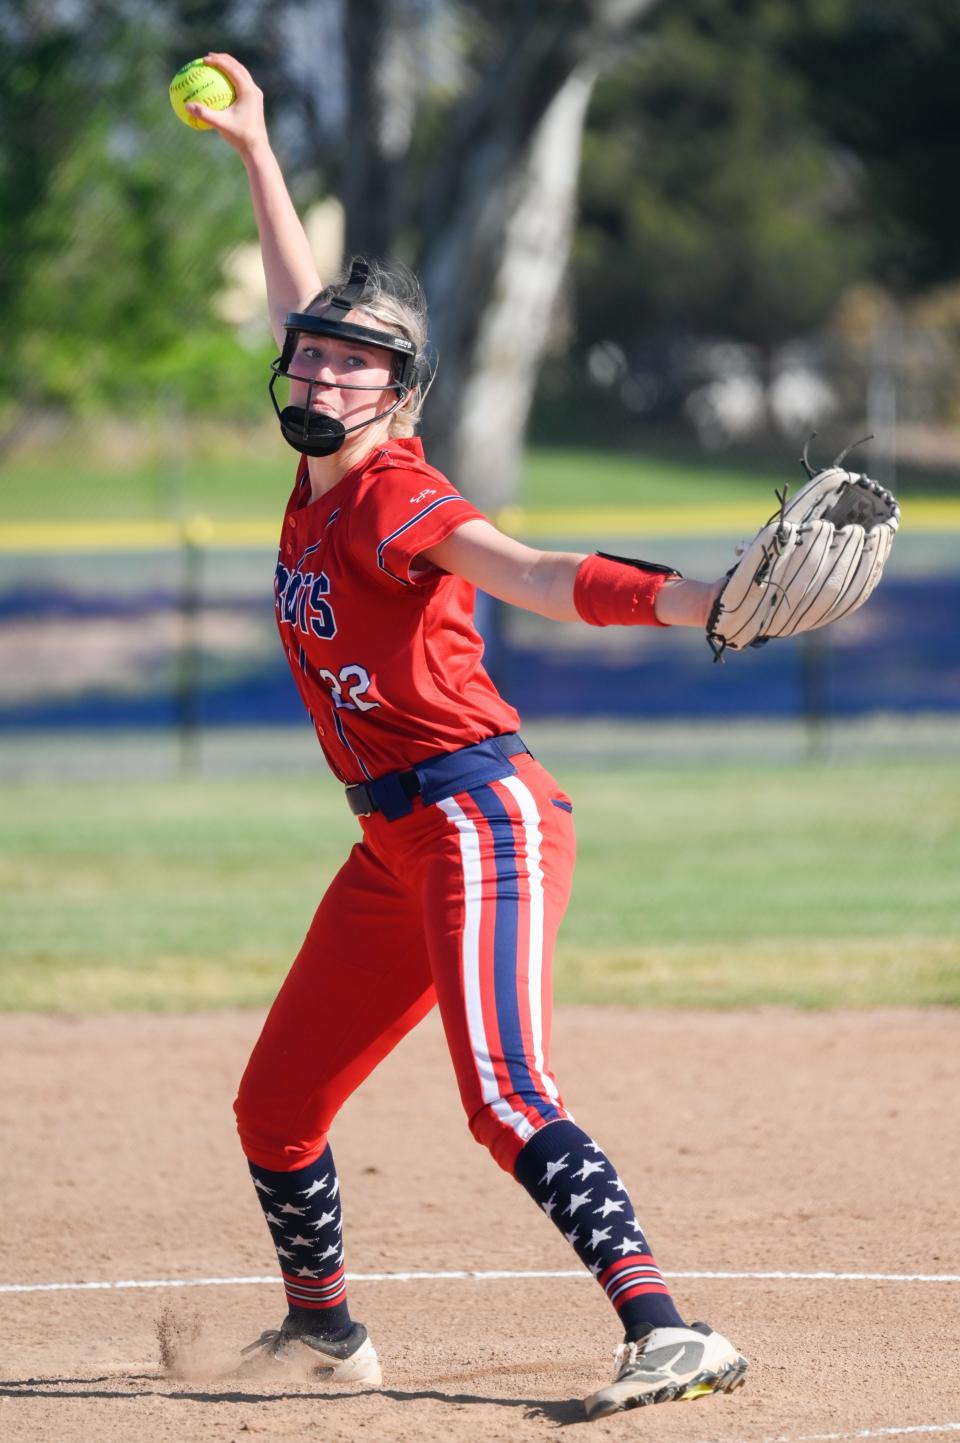 Hesperia Christian's Macy Piorkowski throws a pitch during the first round of CIF-Southern Section Division 8 Championships against St. Pius X-St. Matthias Academy on Thursday, May 3, 2024 in Hesperia. Hesperia Christian defeated St. Pius X-St. Matthias Academy 19-2 to advance to the quarter final.